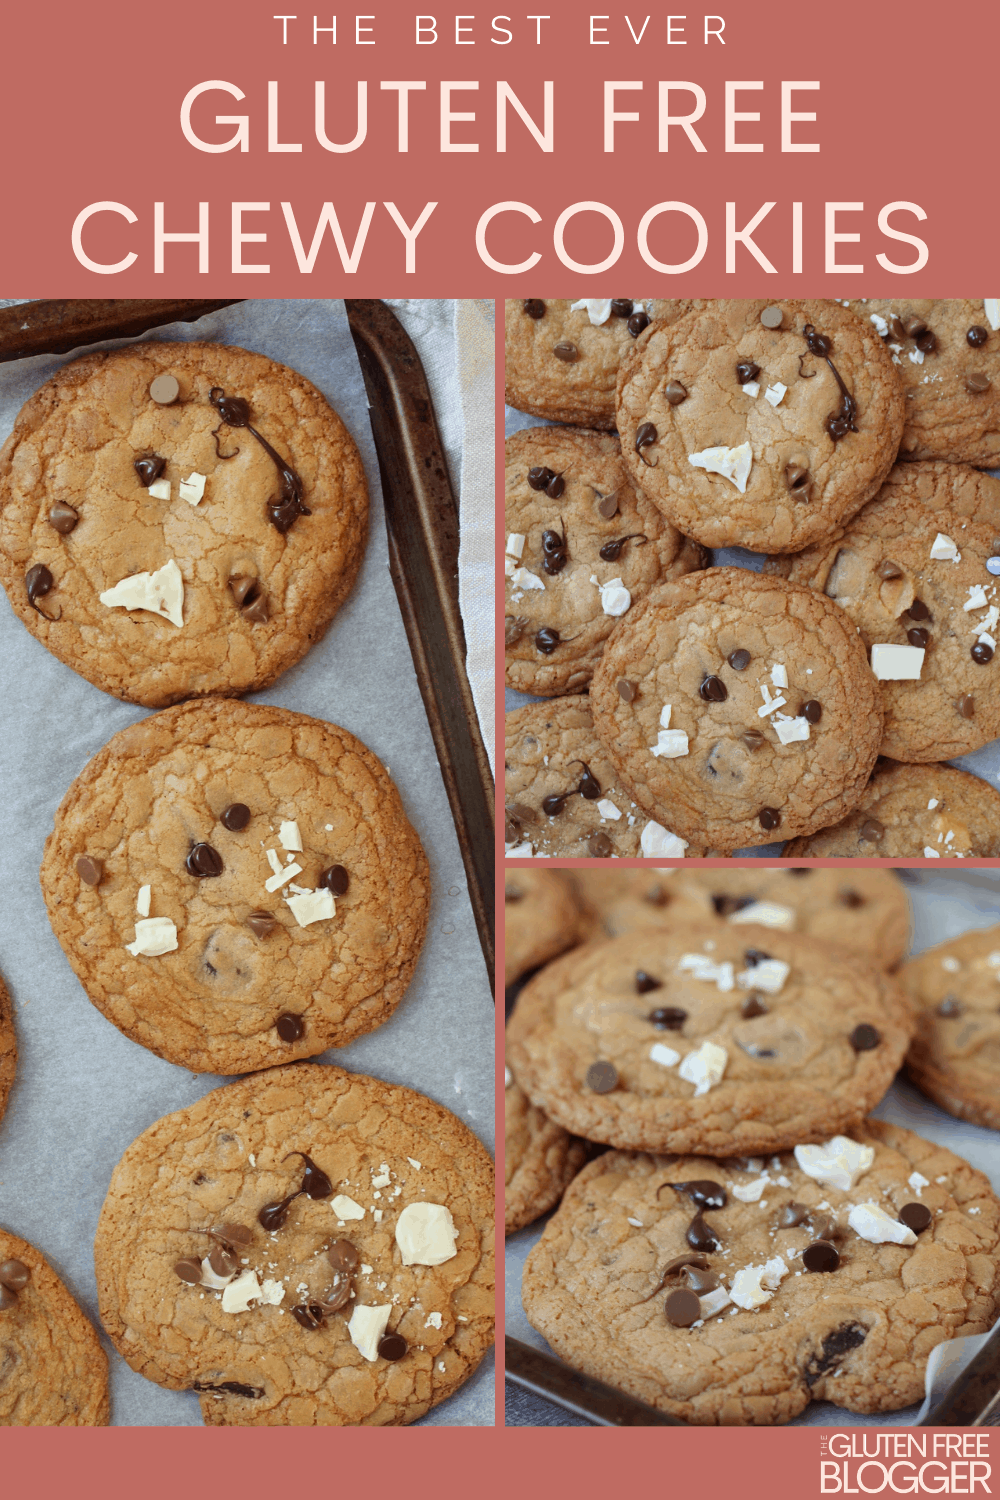 https://www.theglutenfreeblogger.com/wp-content/uploads/2021/03/chewy-gluten-free-cookies-triple-chocolate-chip-1.png